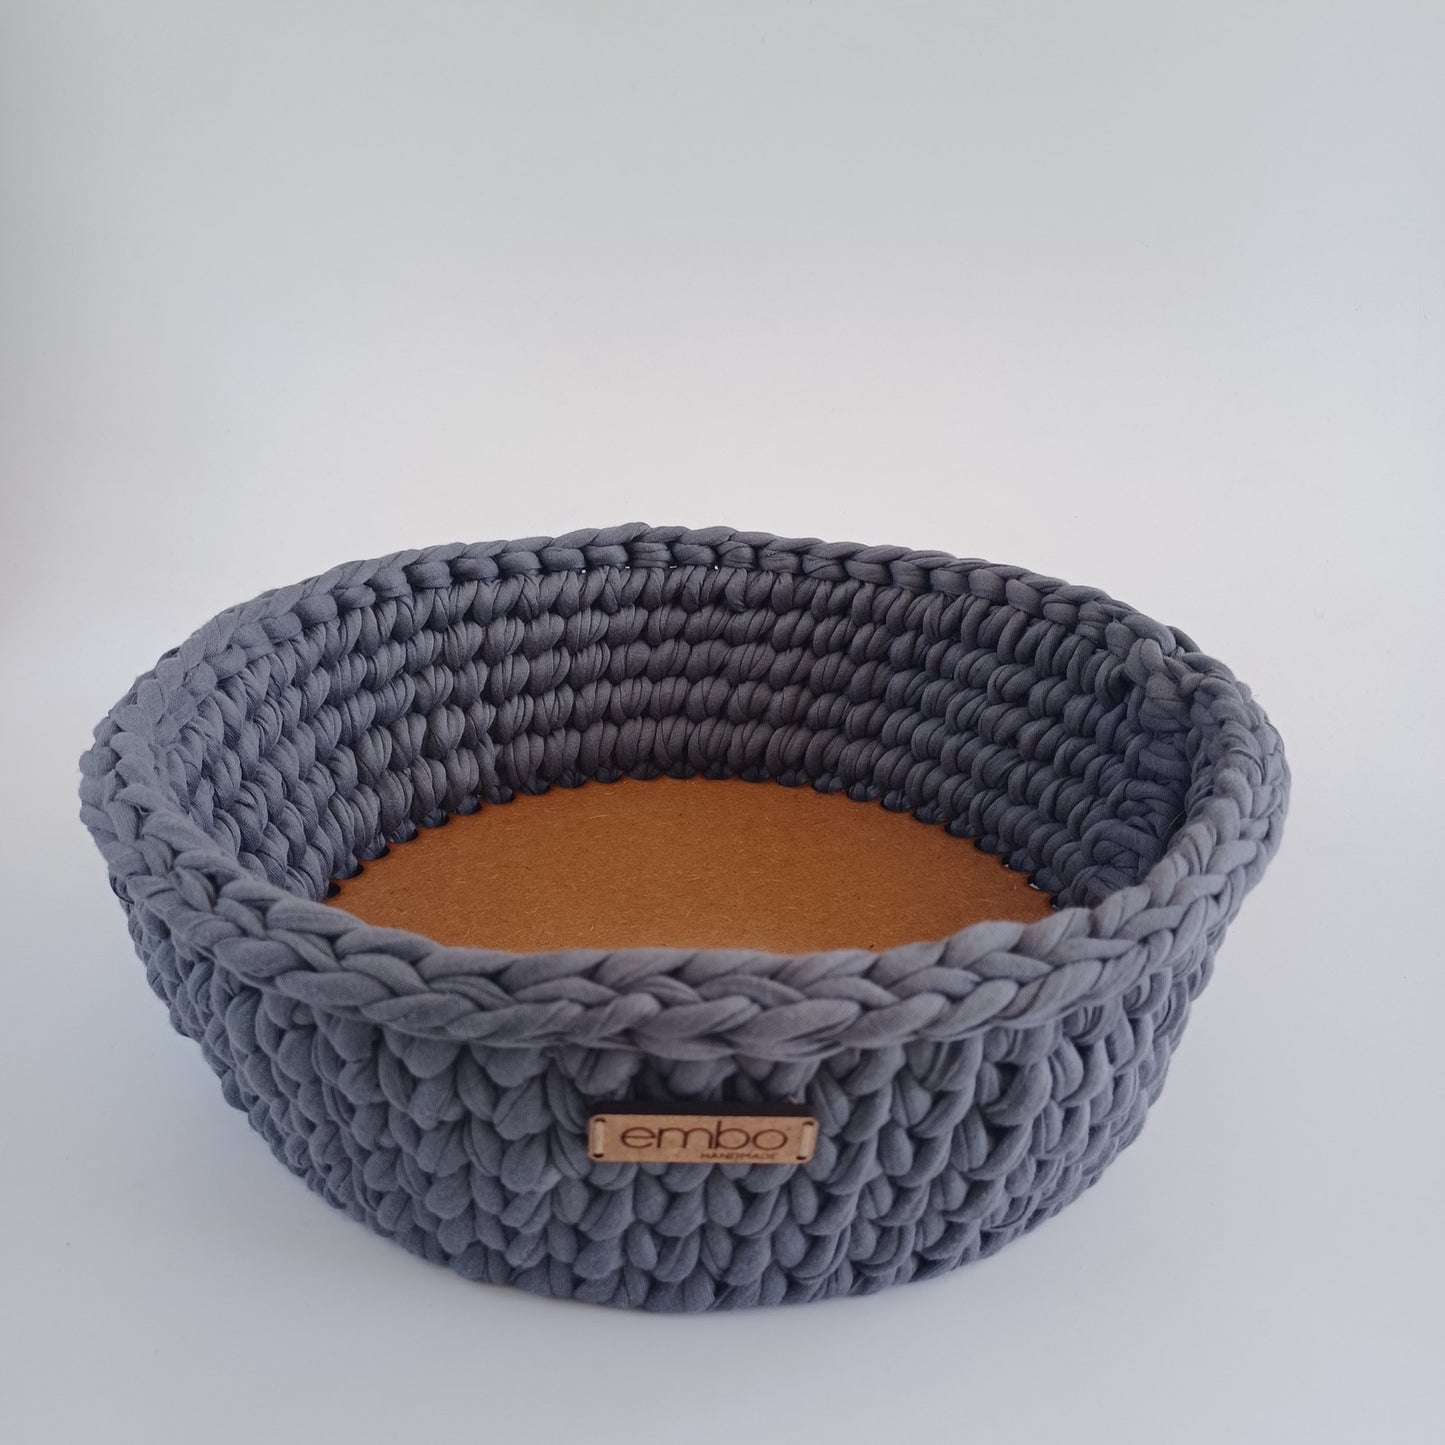 Crochet Fruit Bowl with Wooden Base